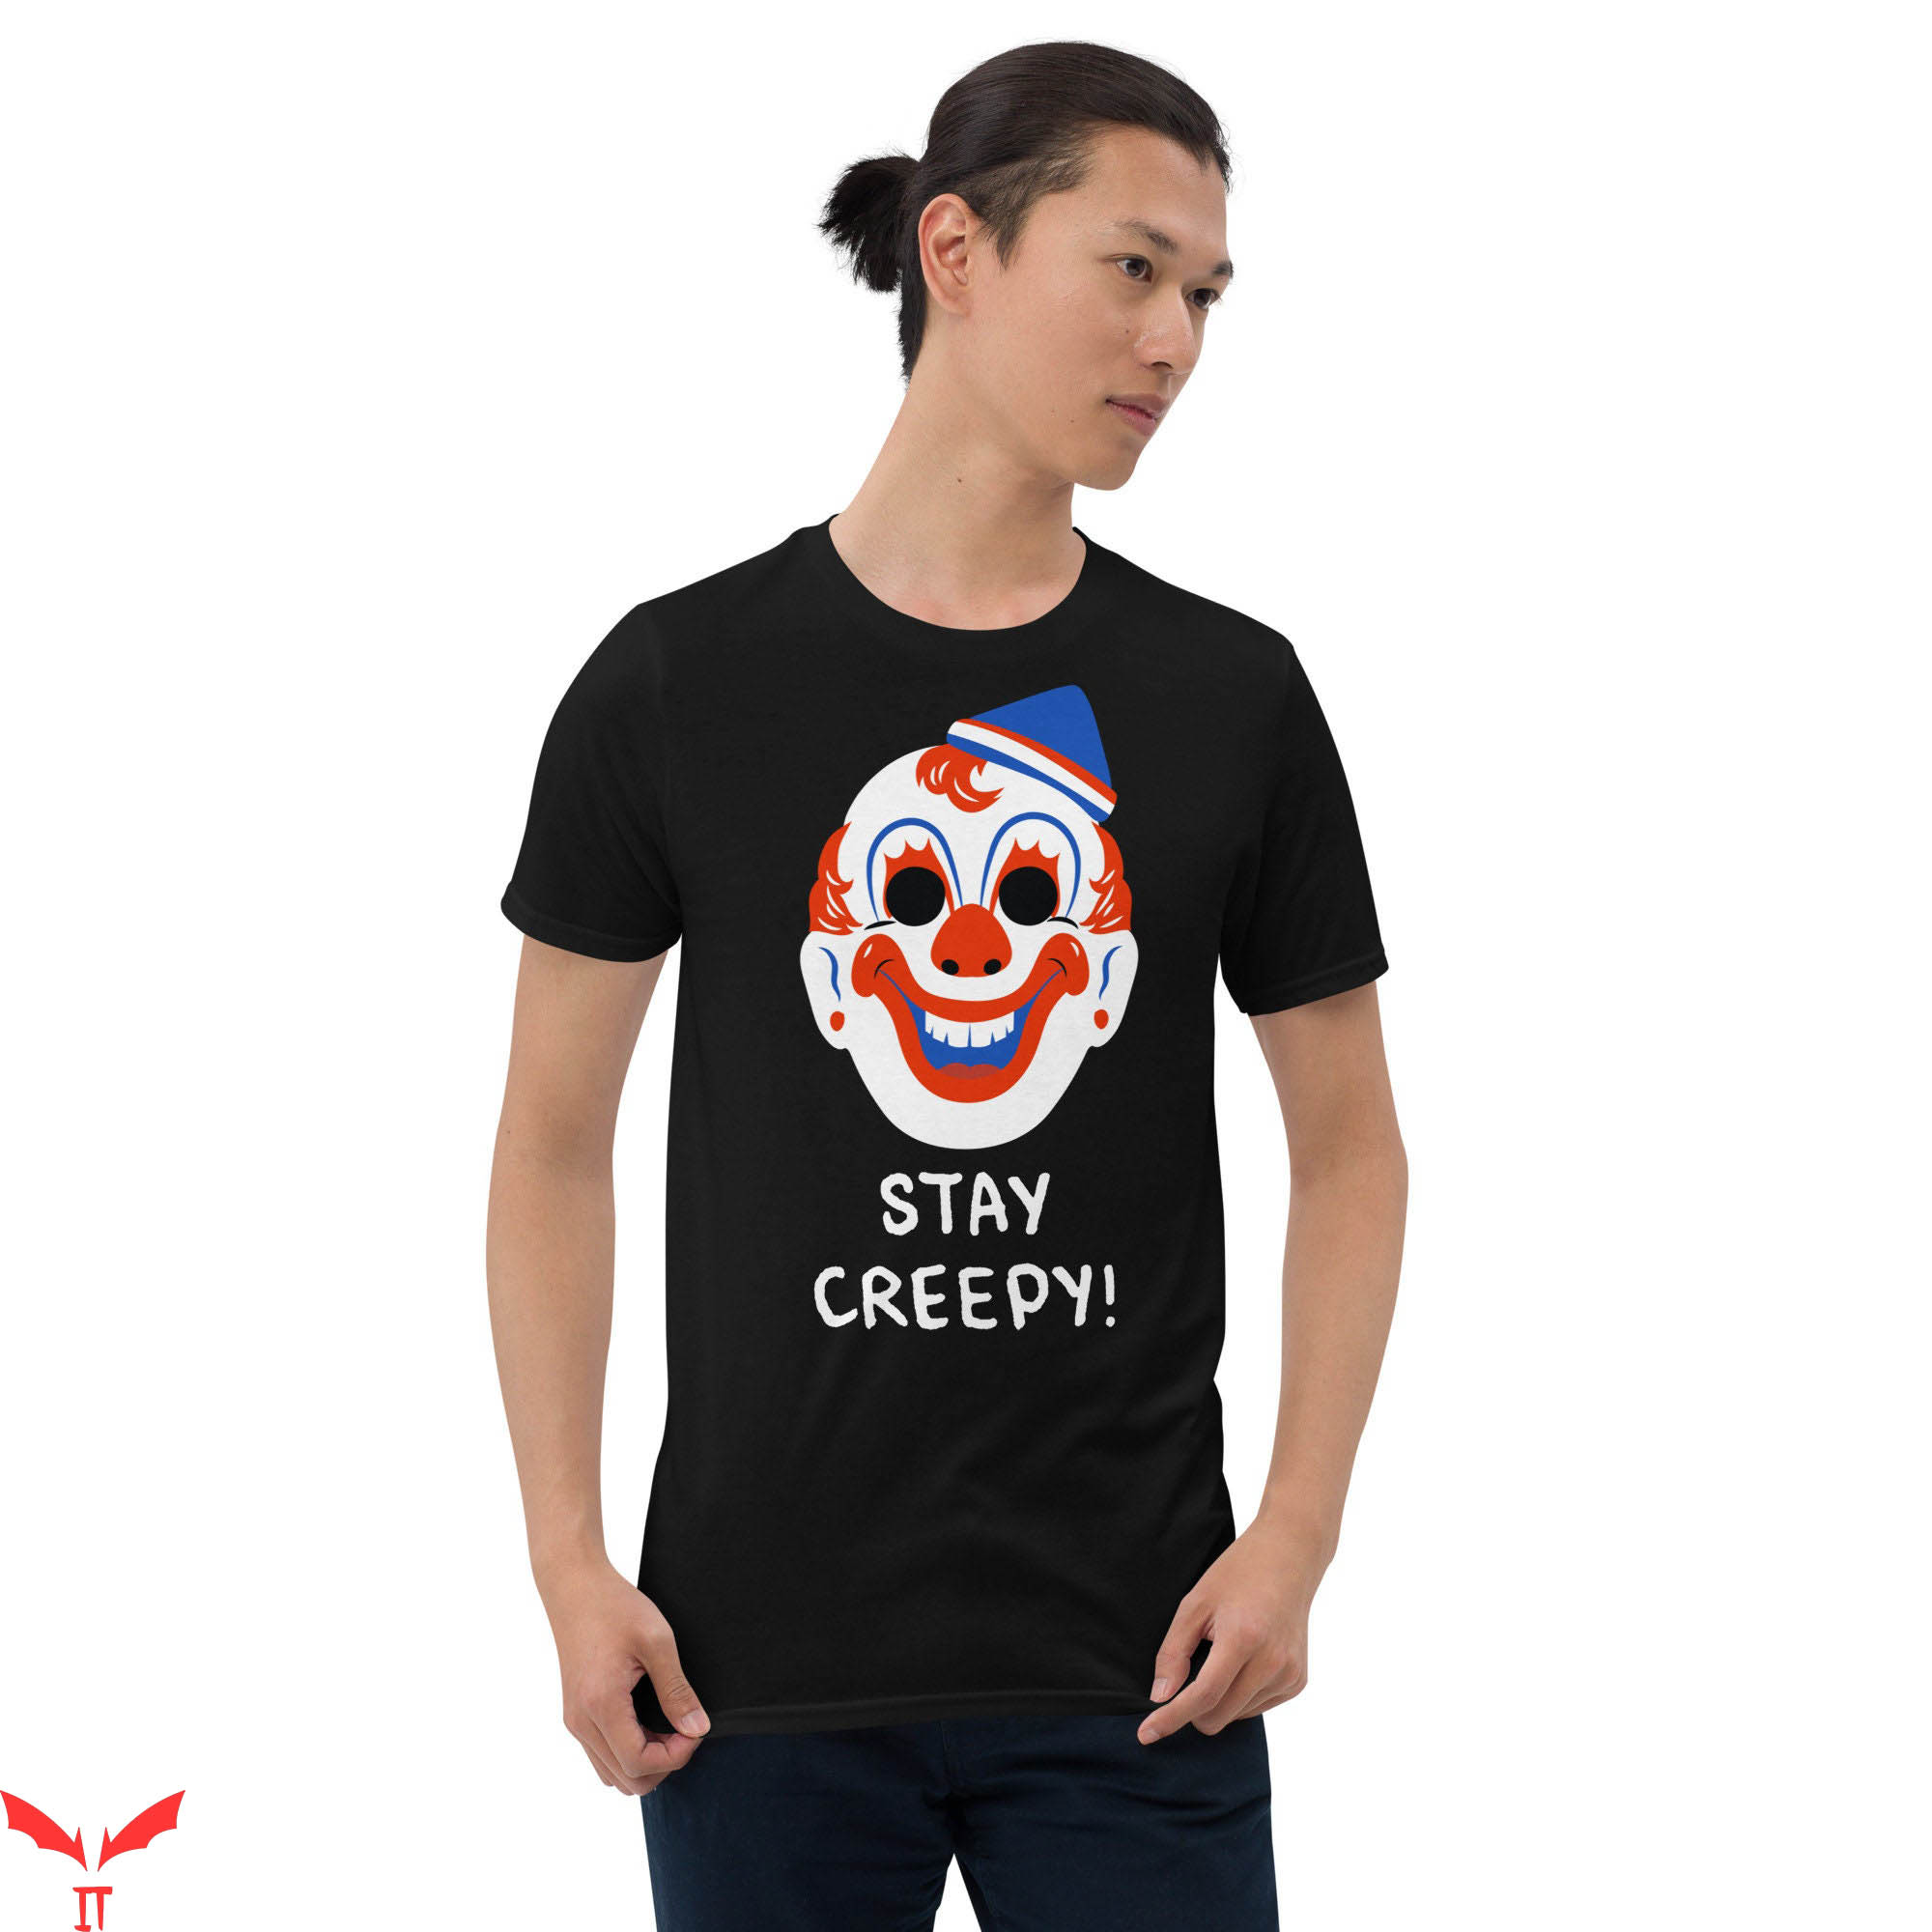 IT The Clown T-Shirt Stay Creepy Scary Clown IT The Movie